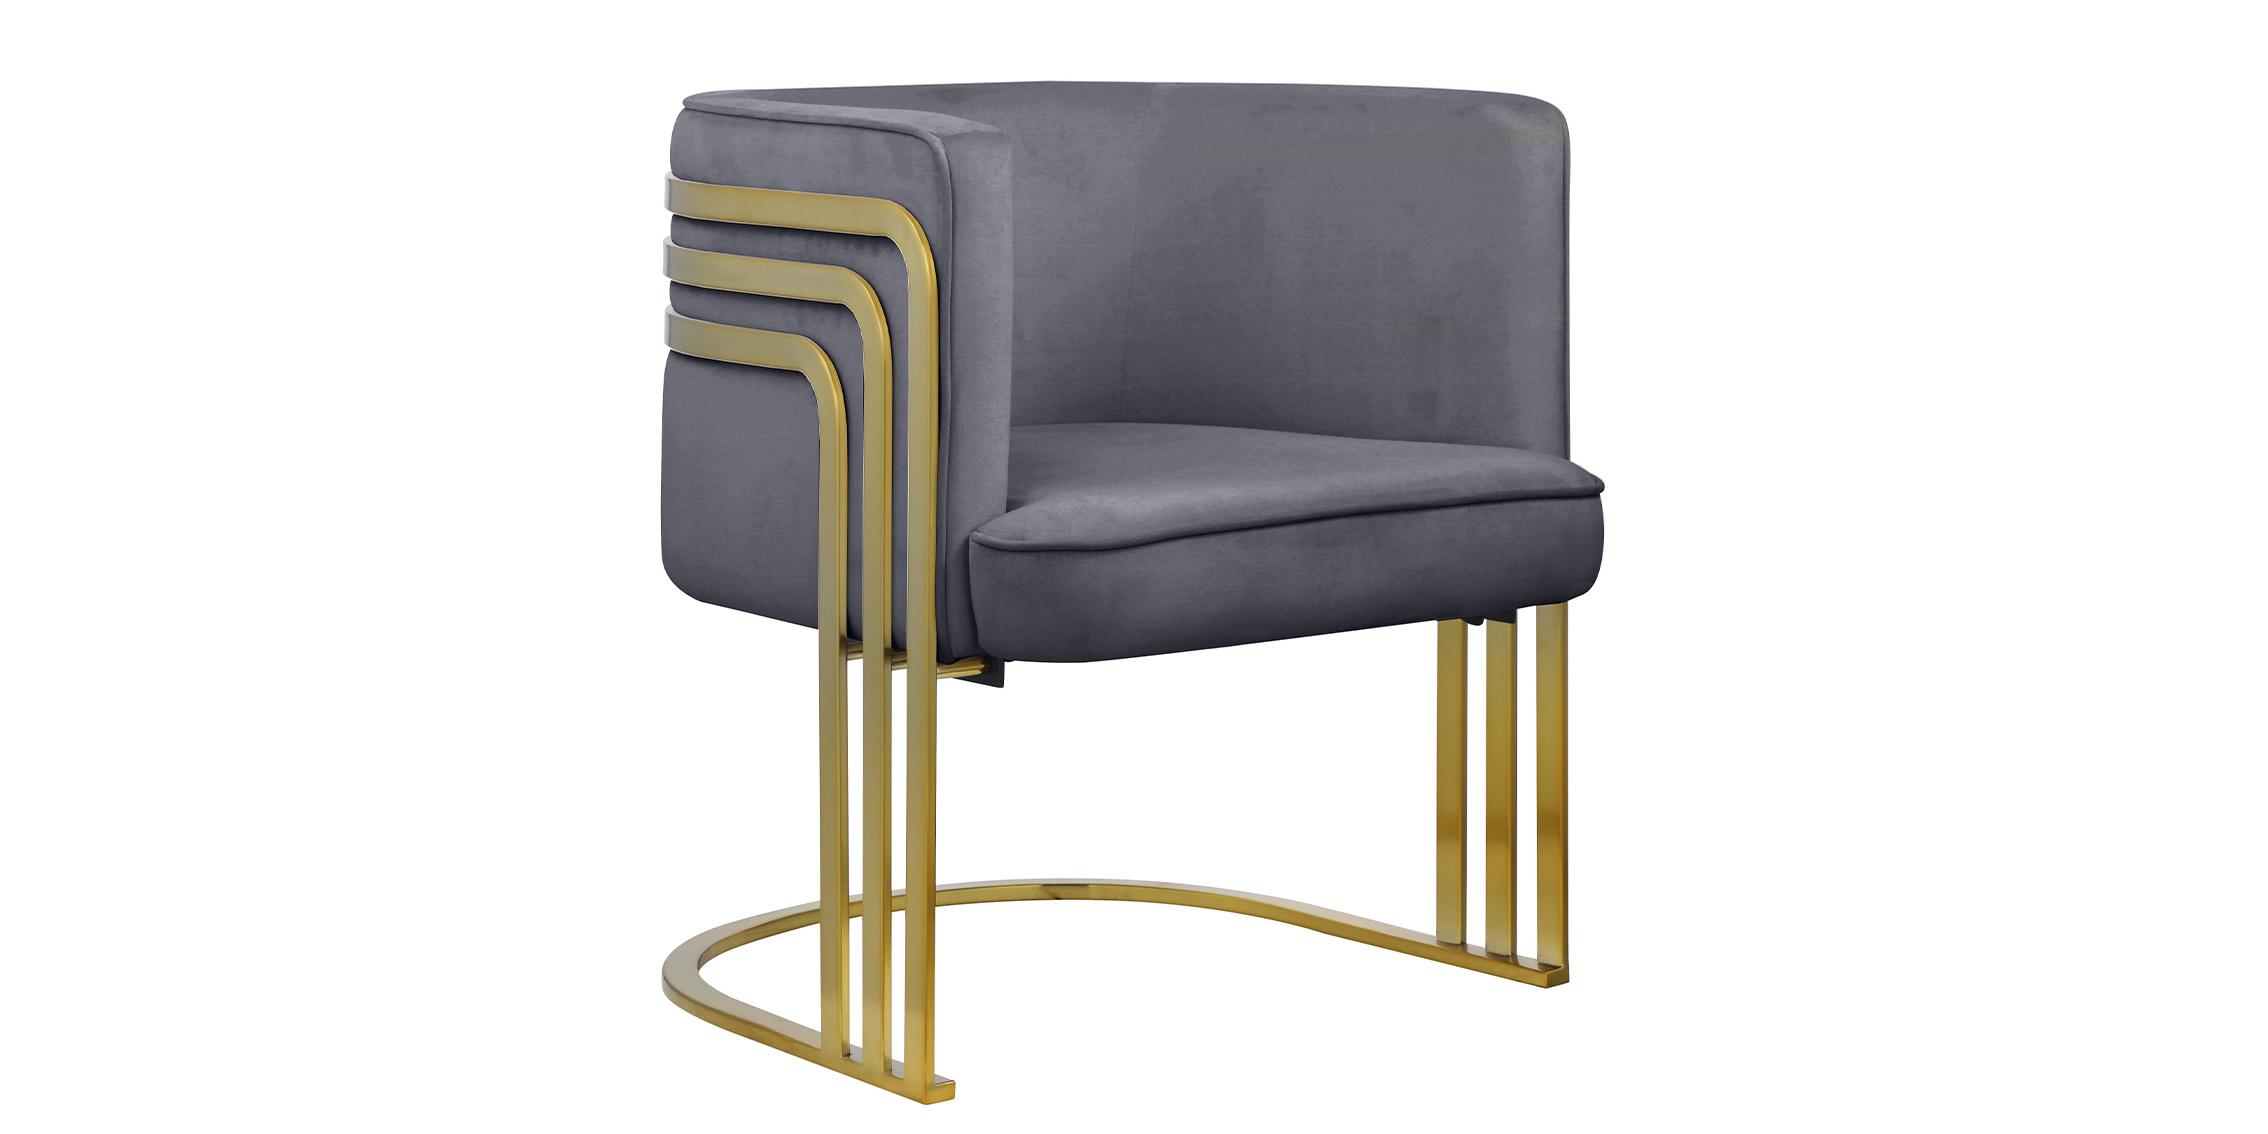 Contemporary Accent Chair RAYS 533Grey 533Grey in Gray, Gold Velvet